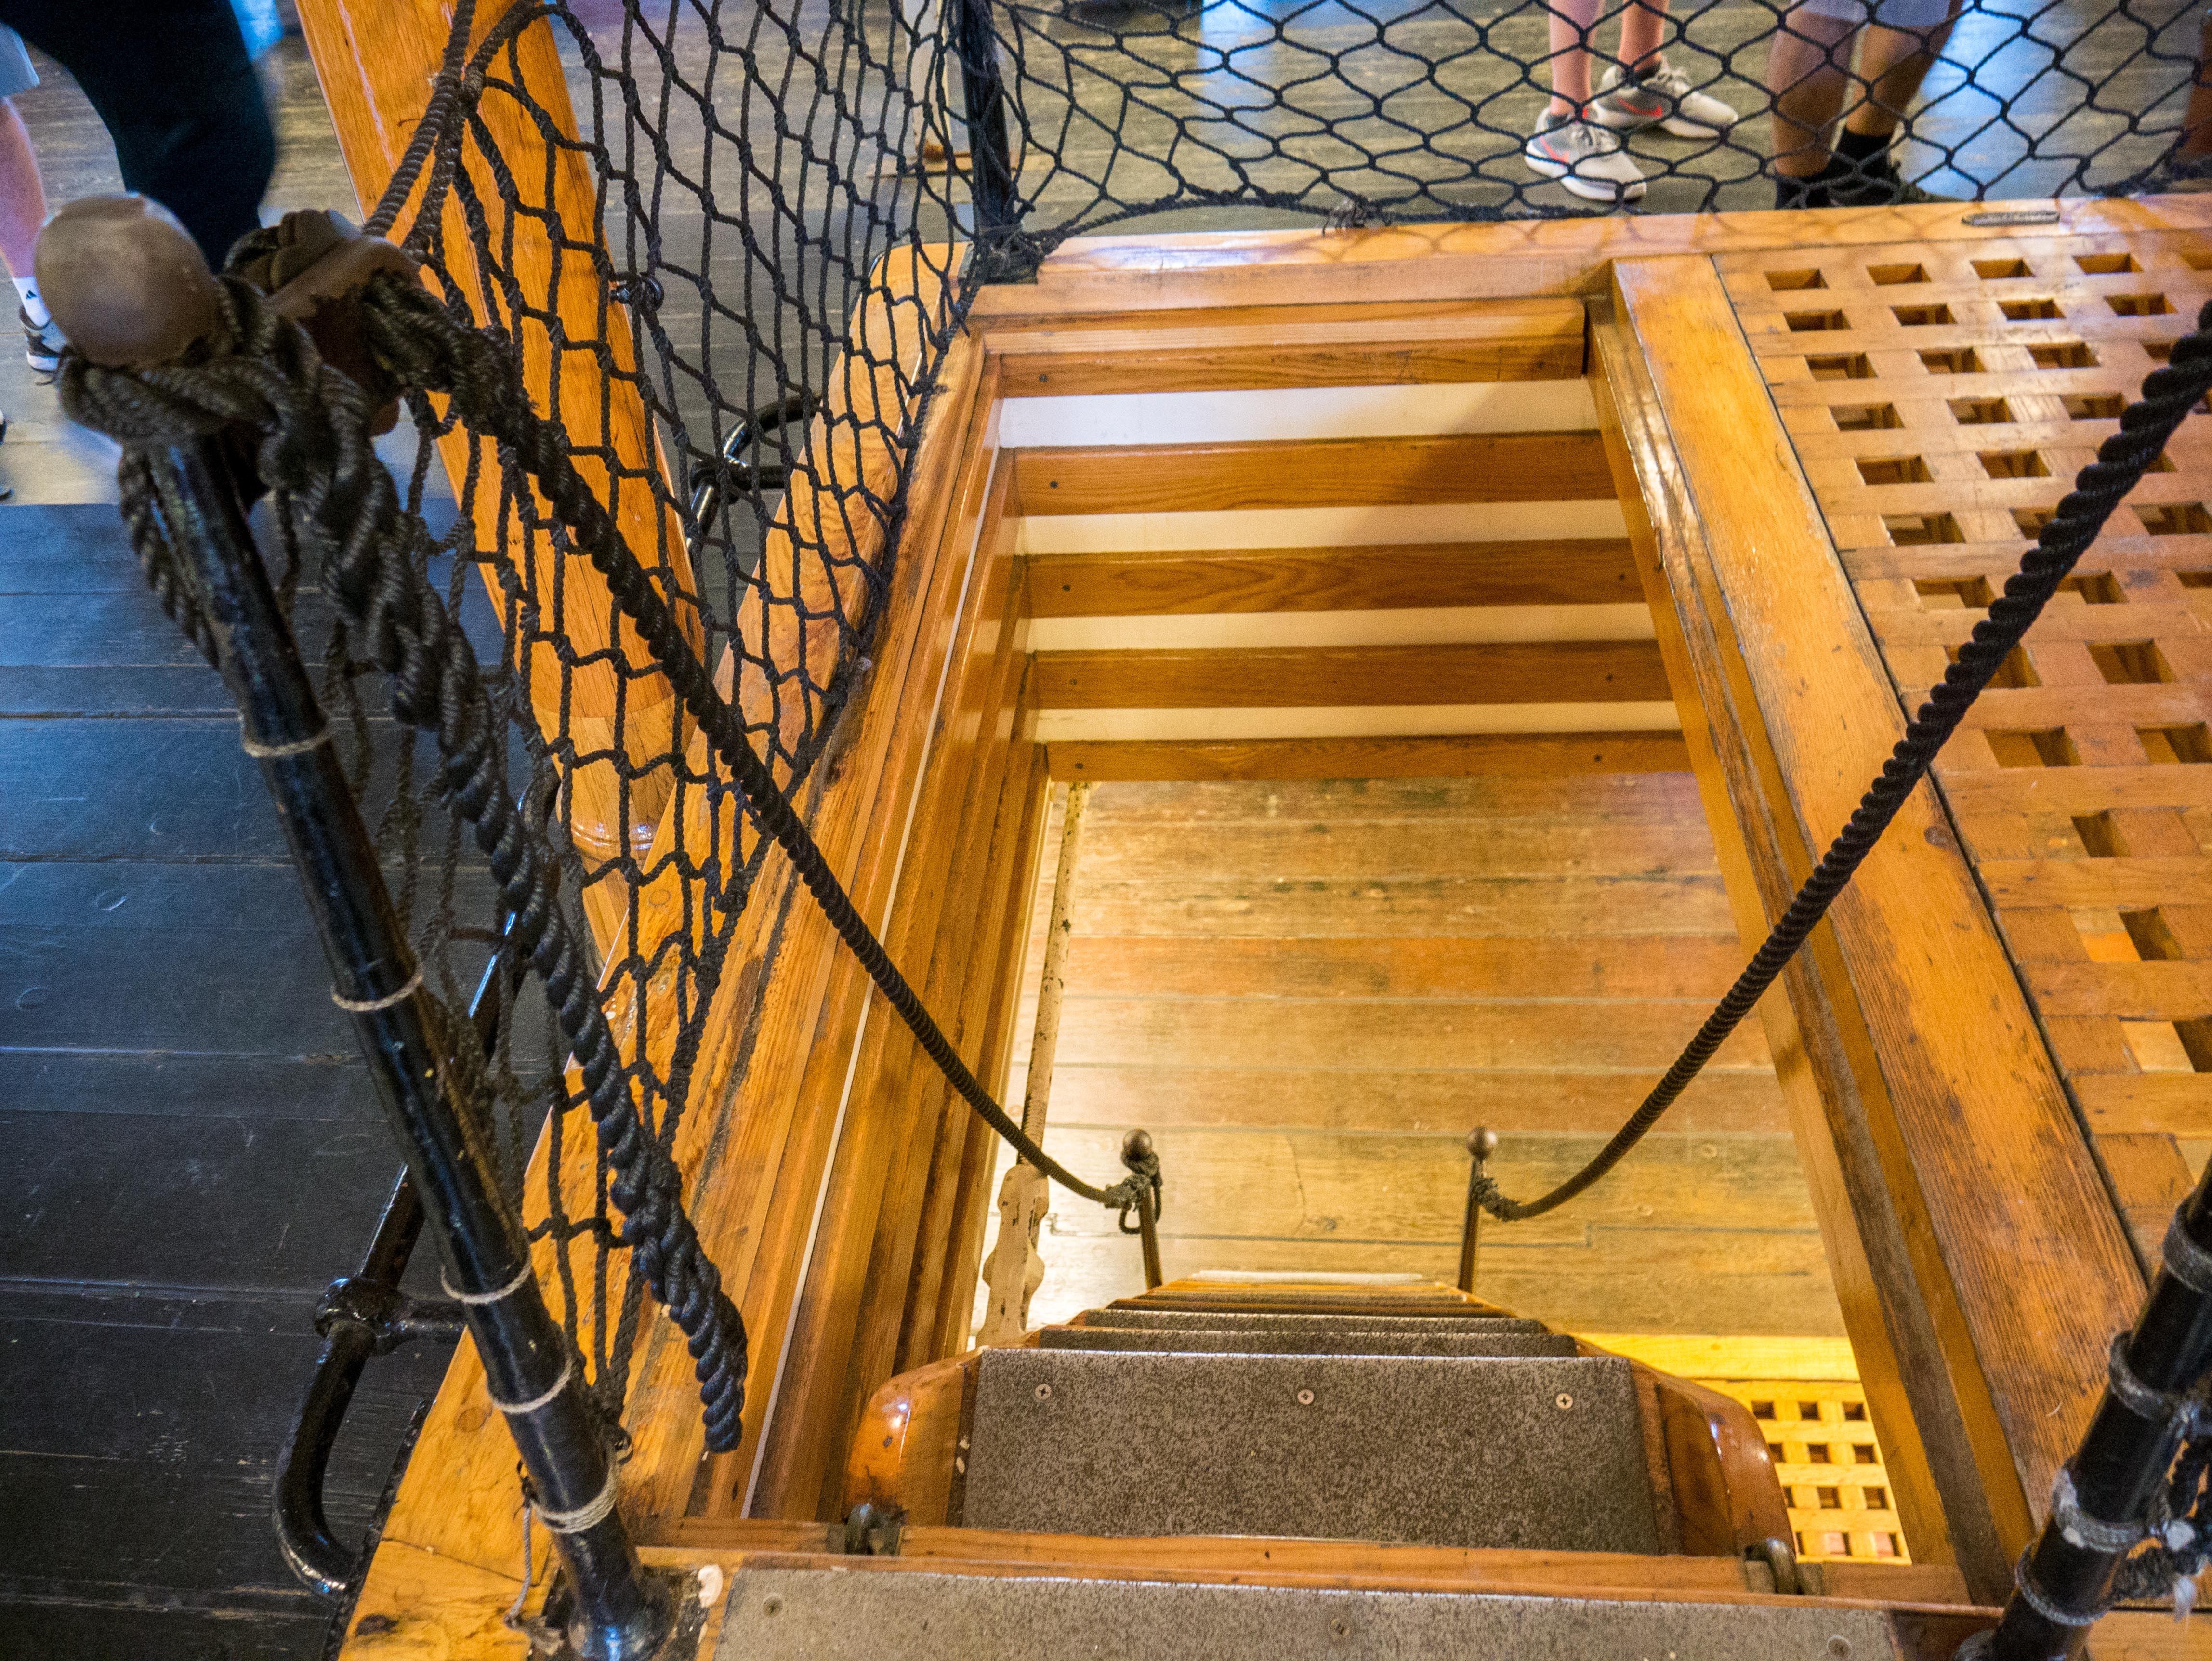 Ladder down to the lower decks of the USS Constitution